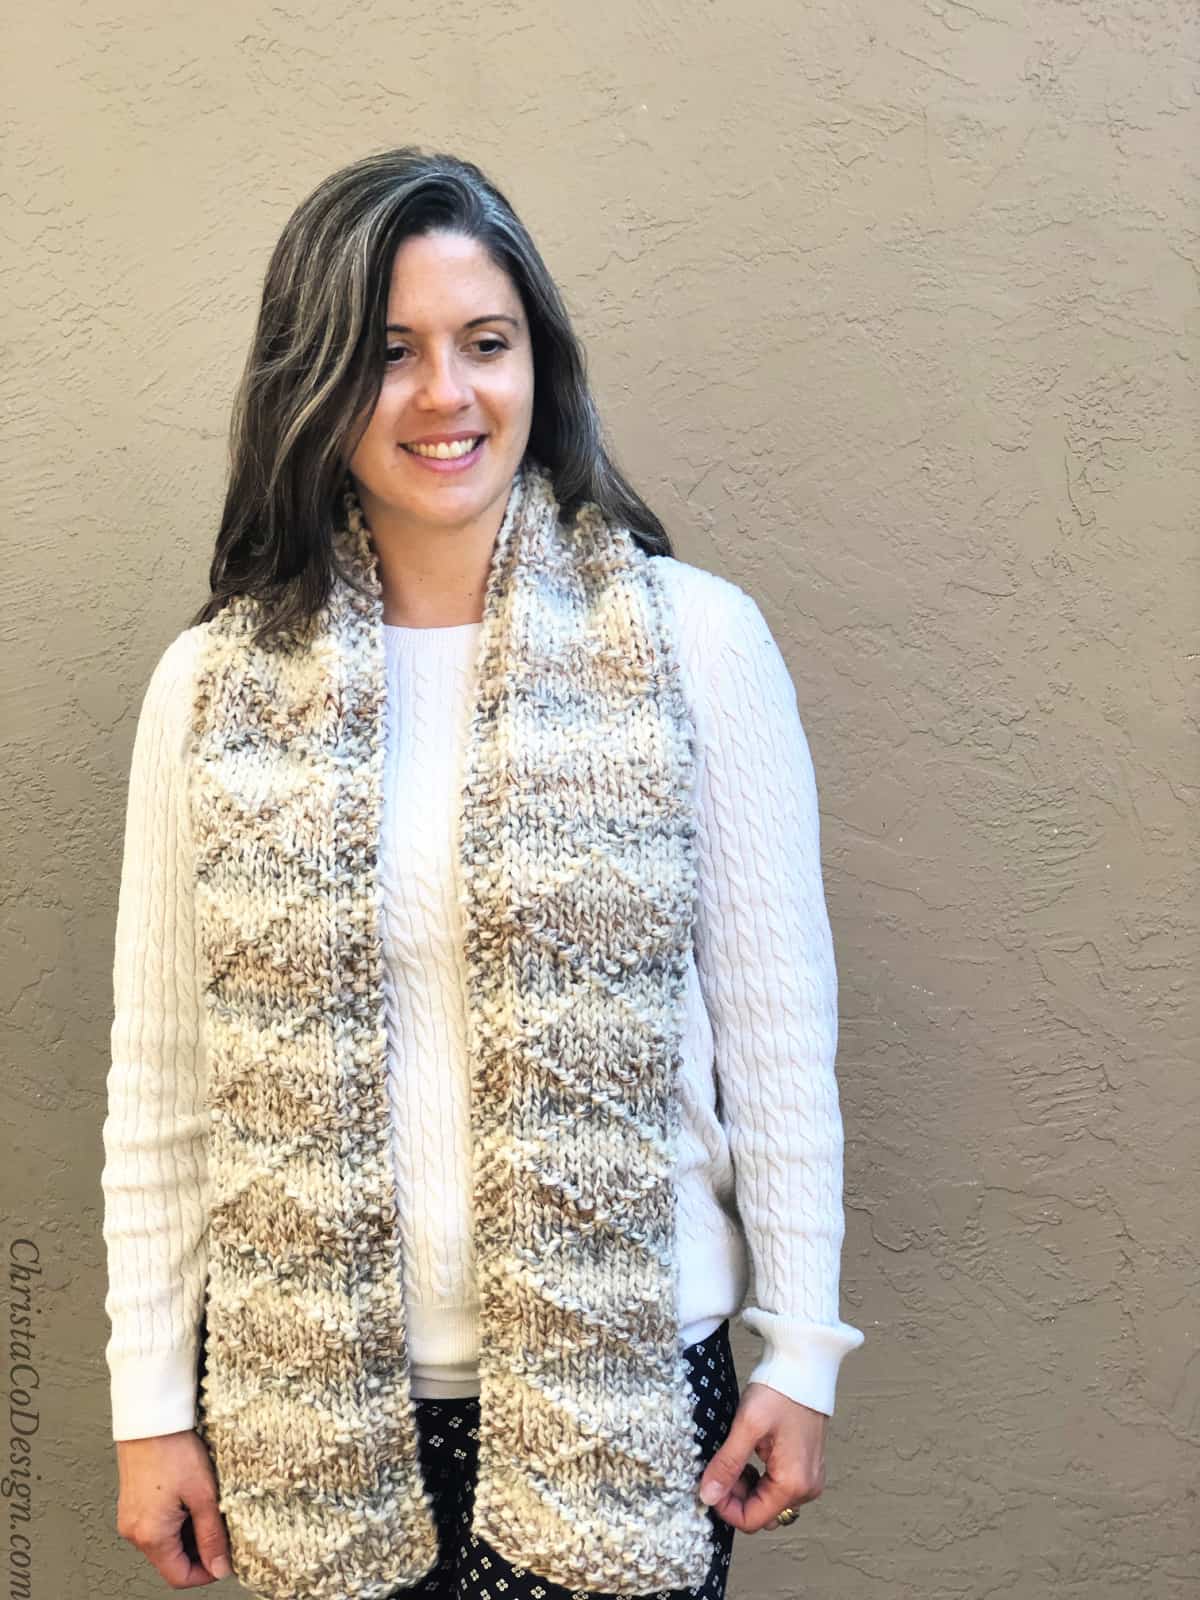 Woman in chunky knit scarf in beiges over white sweater smiling and looking down.